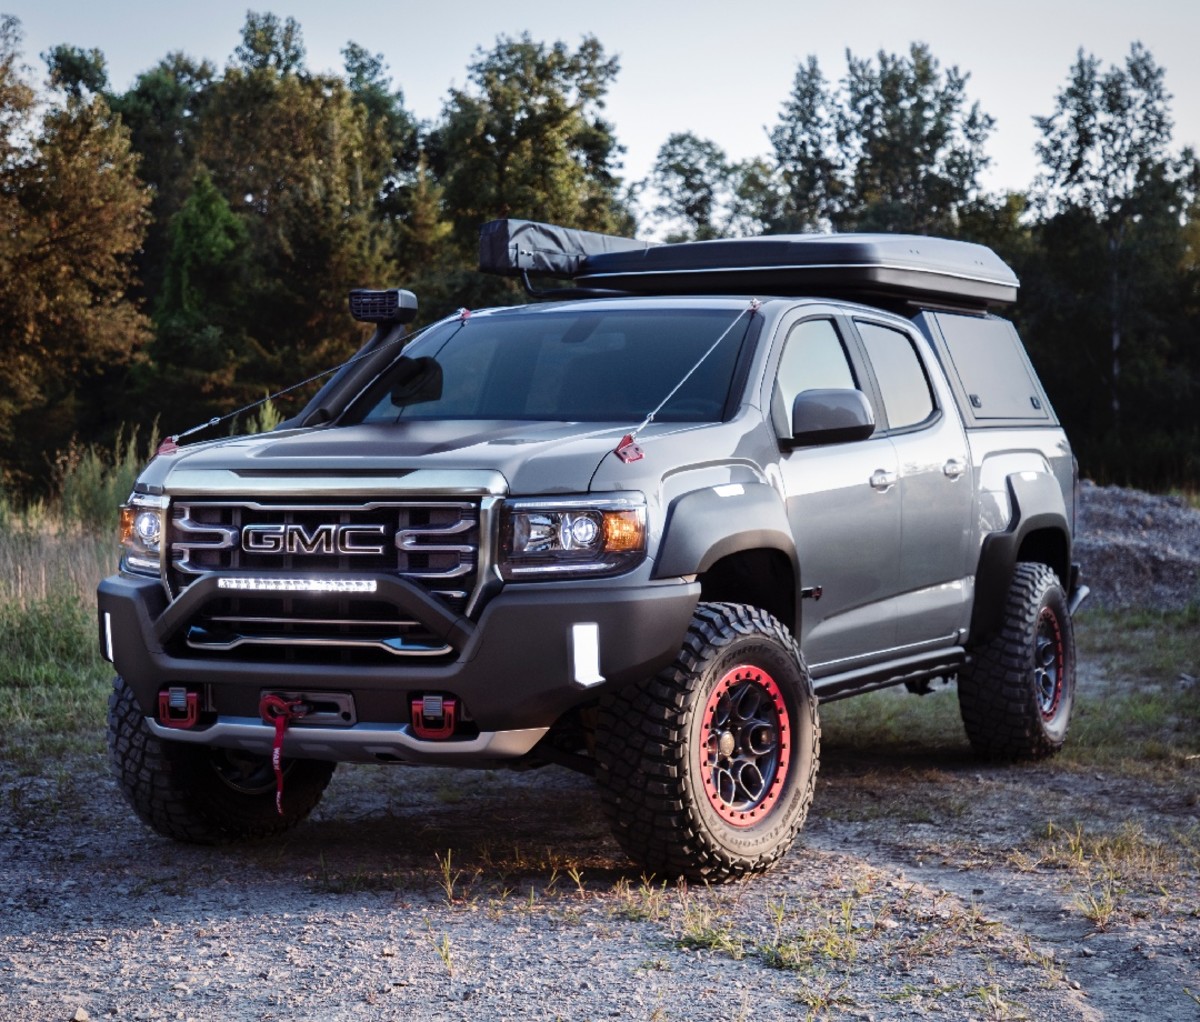 GMC's new Land Landing Concept is a more complex and versatile version of the GMC Canyon pickup truck.